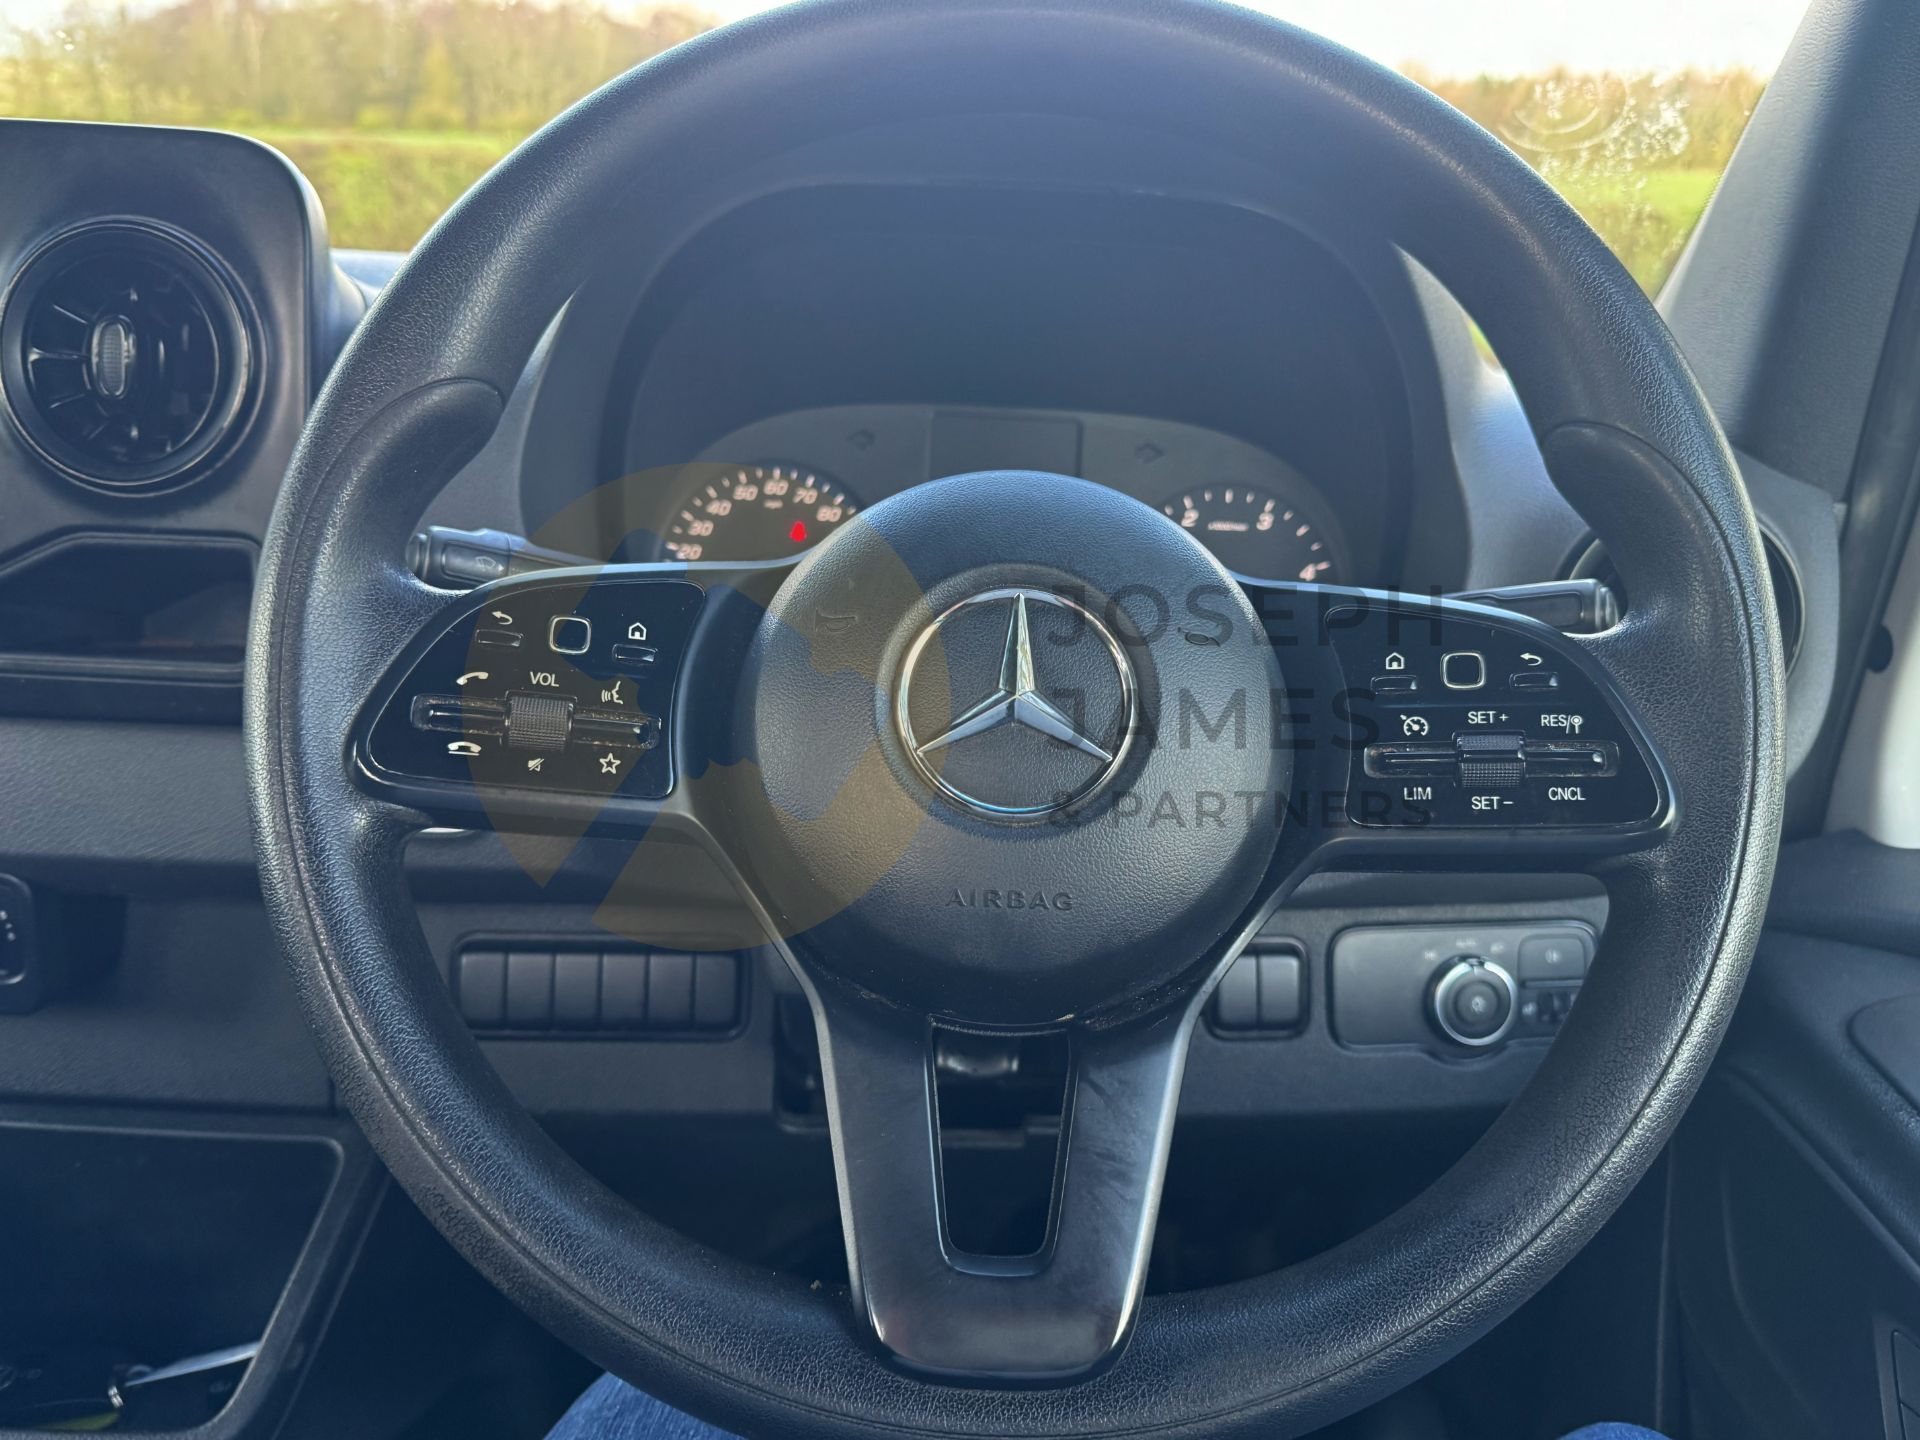 (ON SALE) MERCEDES SPRINTER 314 CDI *LWB - DROPSIDE TRUCK* (2020 -NEW MODEL) 7-G AUTOMATIC *EURO 6* - Image 33 of 36